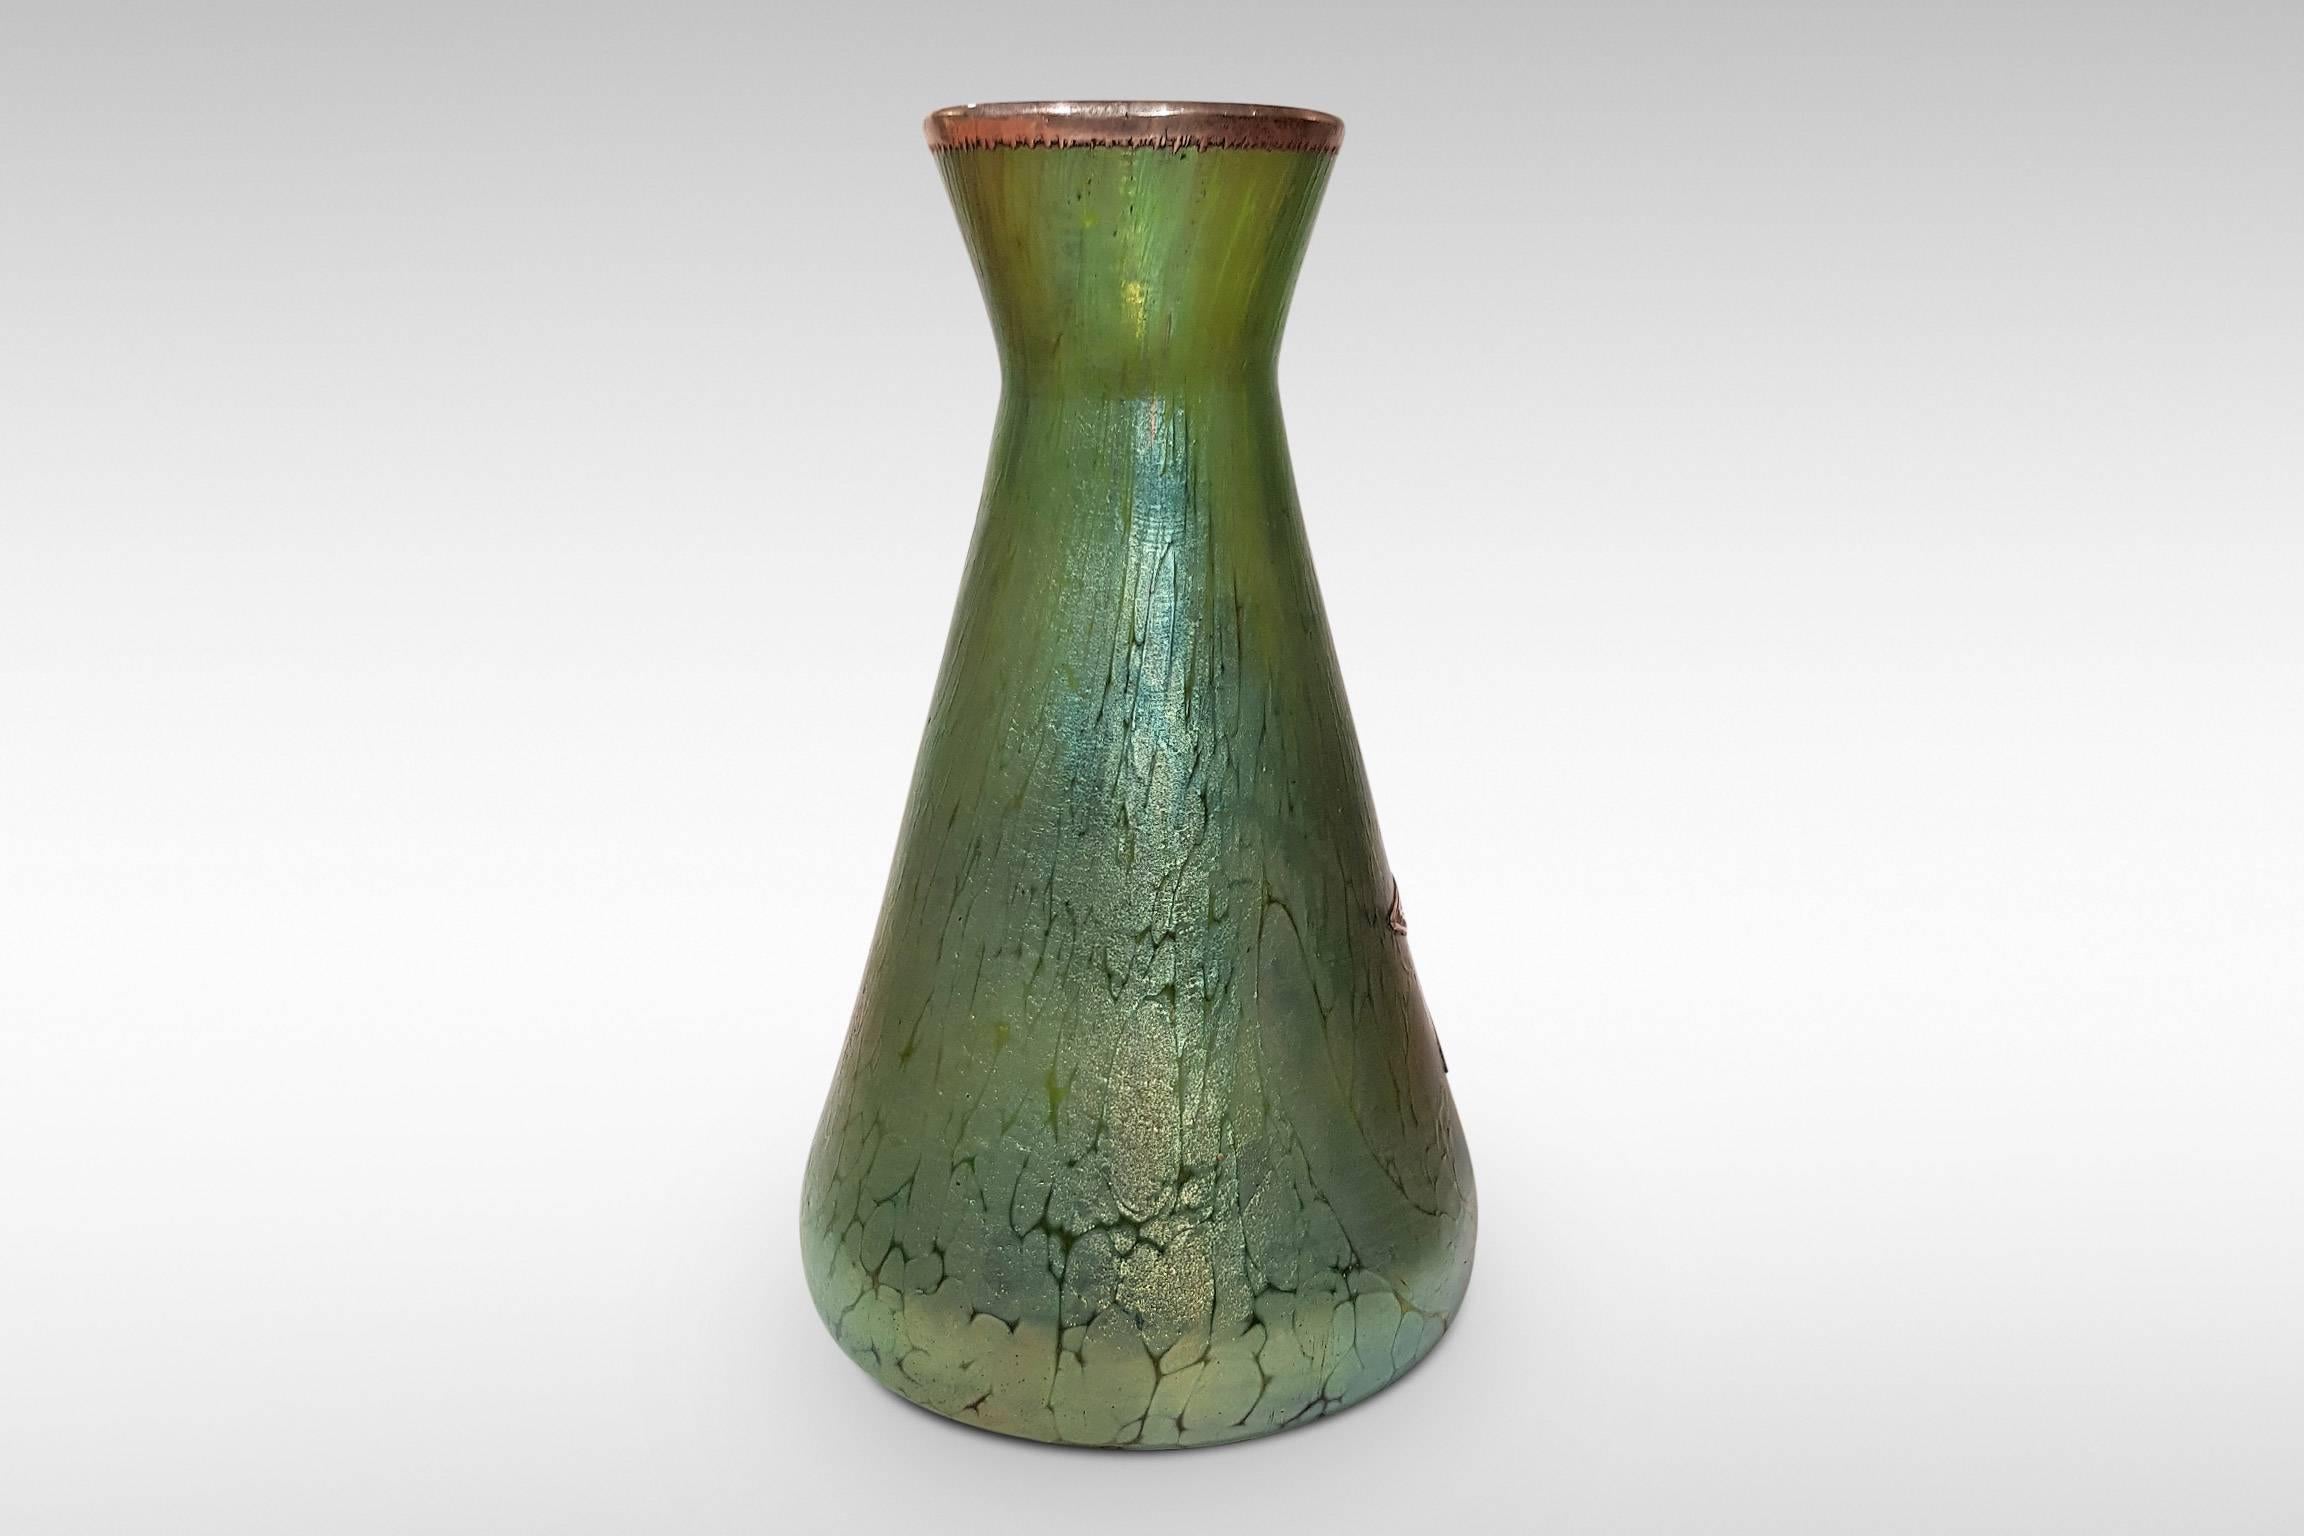 Austrian Art Nouveau/Secessionist Silvered Iridescent Glass Vase Attributed to Loetz For Sale